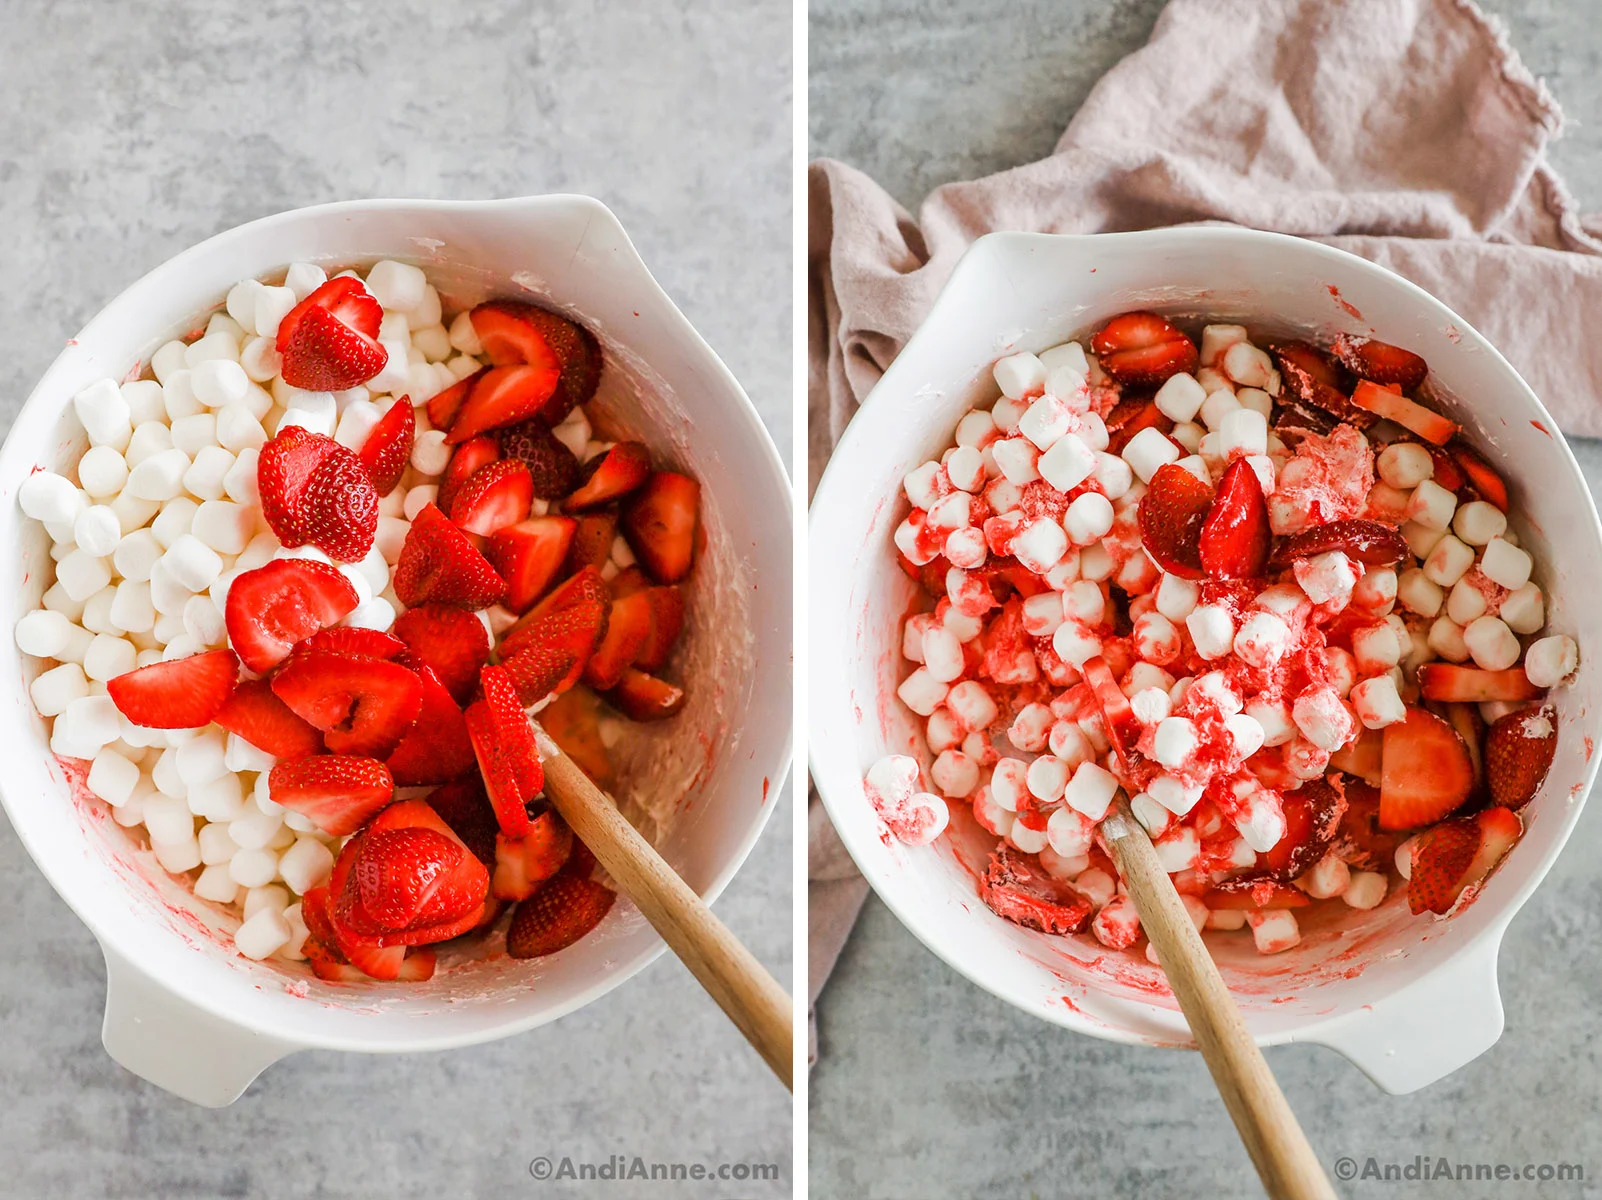 Mini marshmallows and sliced strawberries mixed into strawberry gelatin mixture.